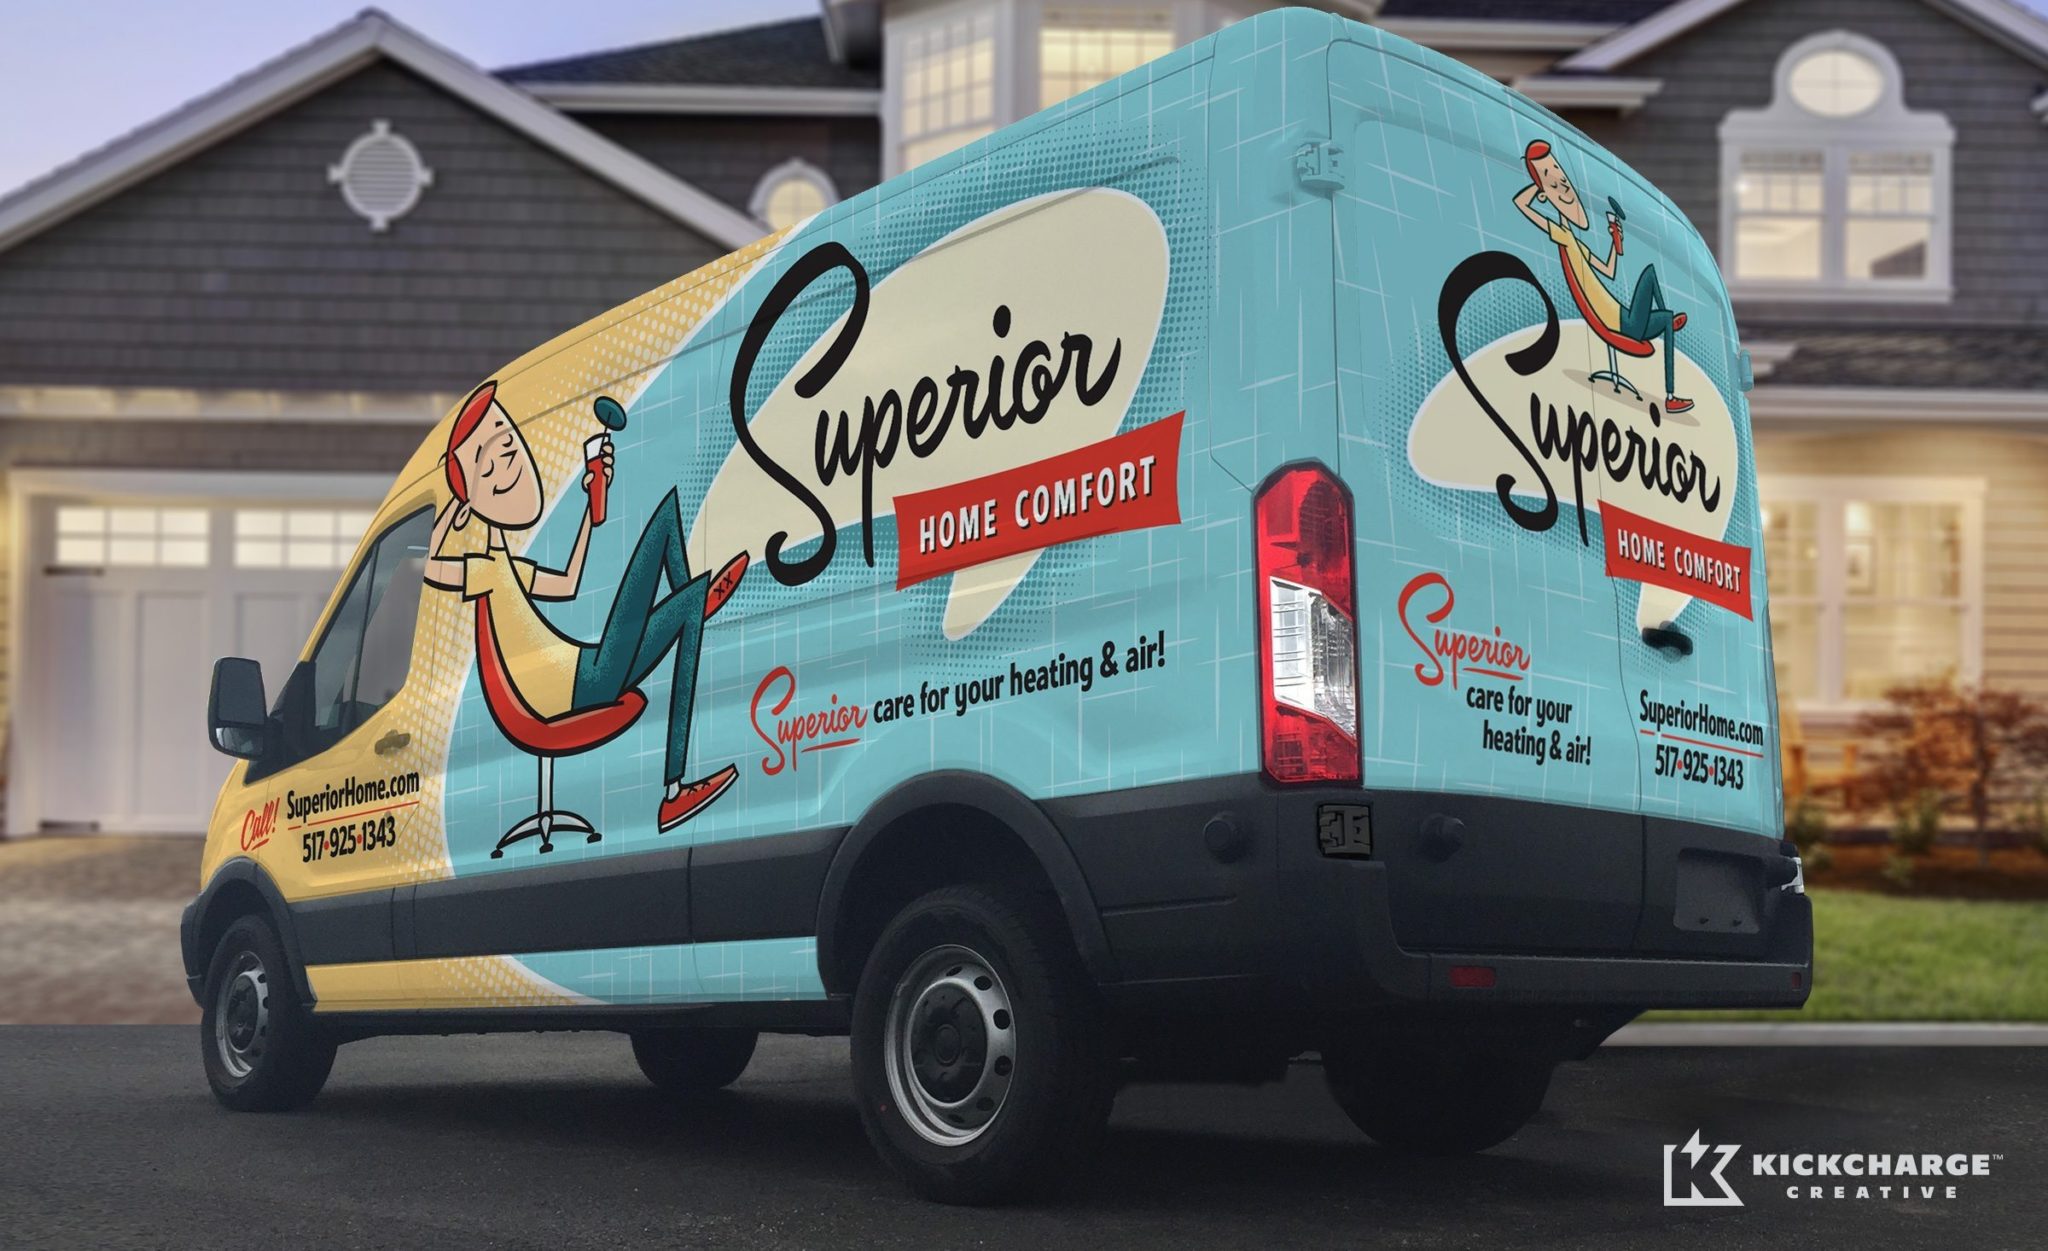 When it comes to HVAC marketing, it's all about standing out and connecting with your customers with a unique brand. This eye-catching truck wrap for a Michigan-based home comfort company will surely do both.